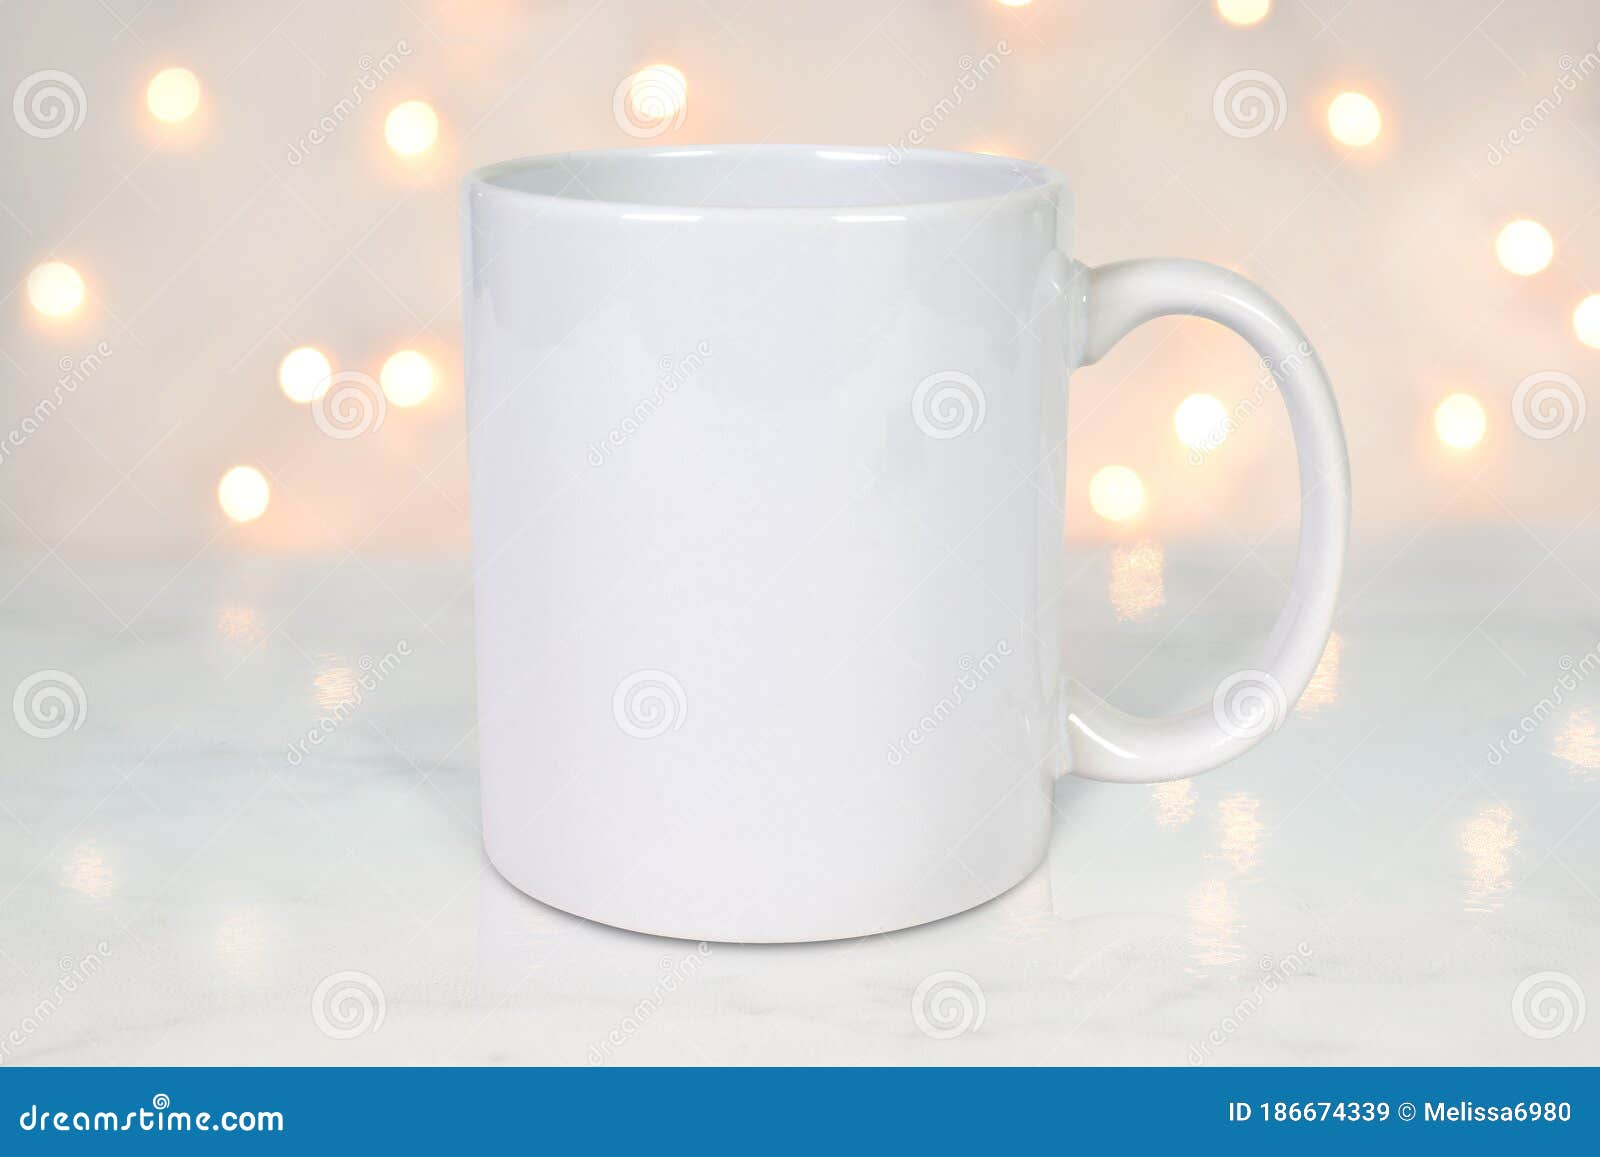 Download 11 Ounce Coffee Mug Mockup With White Bokeh Lights Stock Image Image Of Design Expresso 186674339